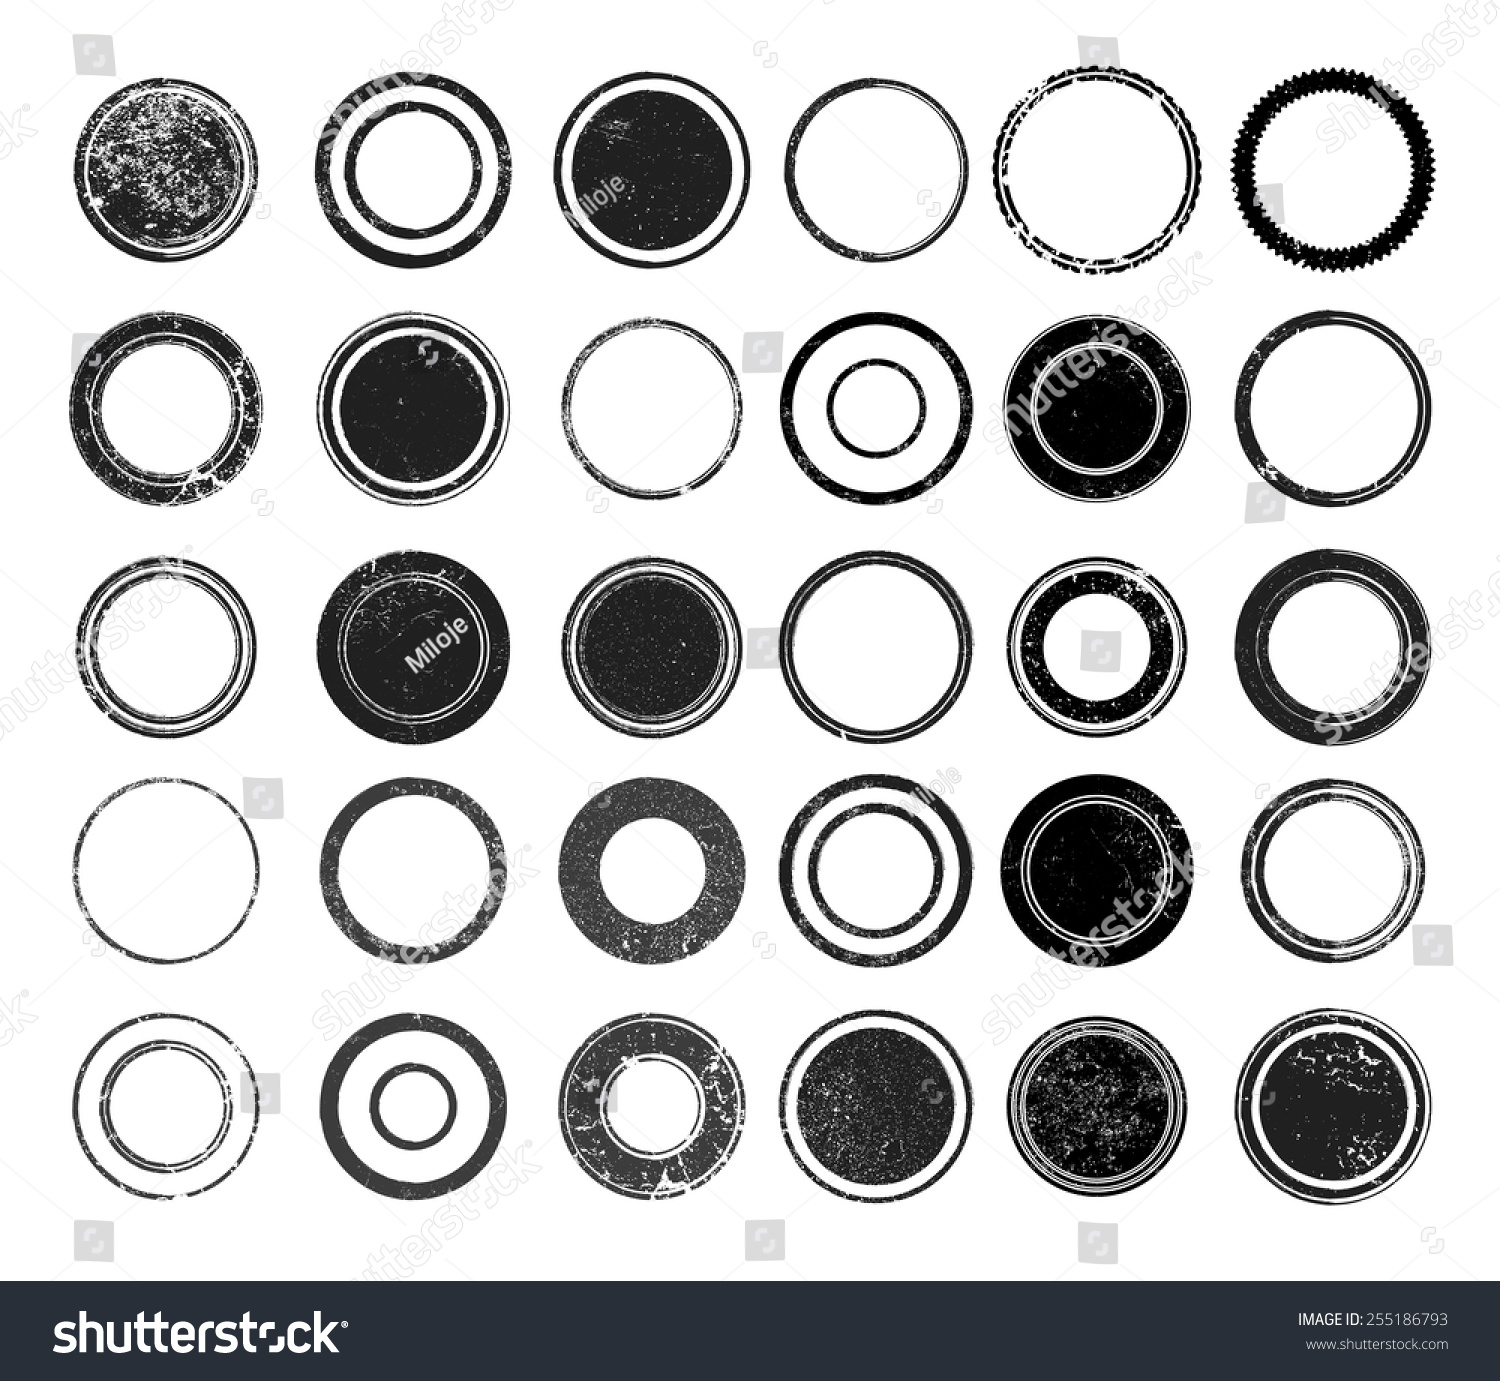 Set Grunge Rubber Circle Stamps Vector Stock Vector 255186793